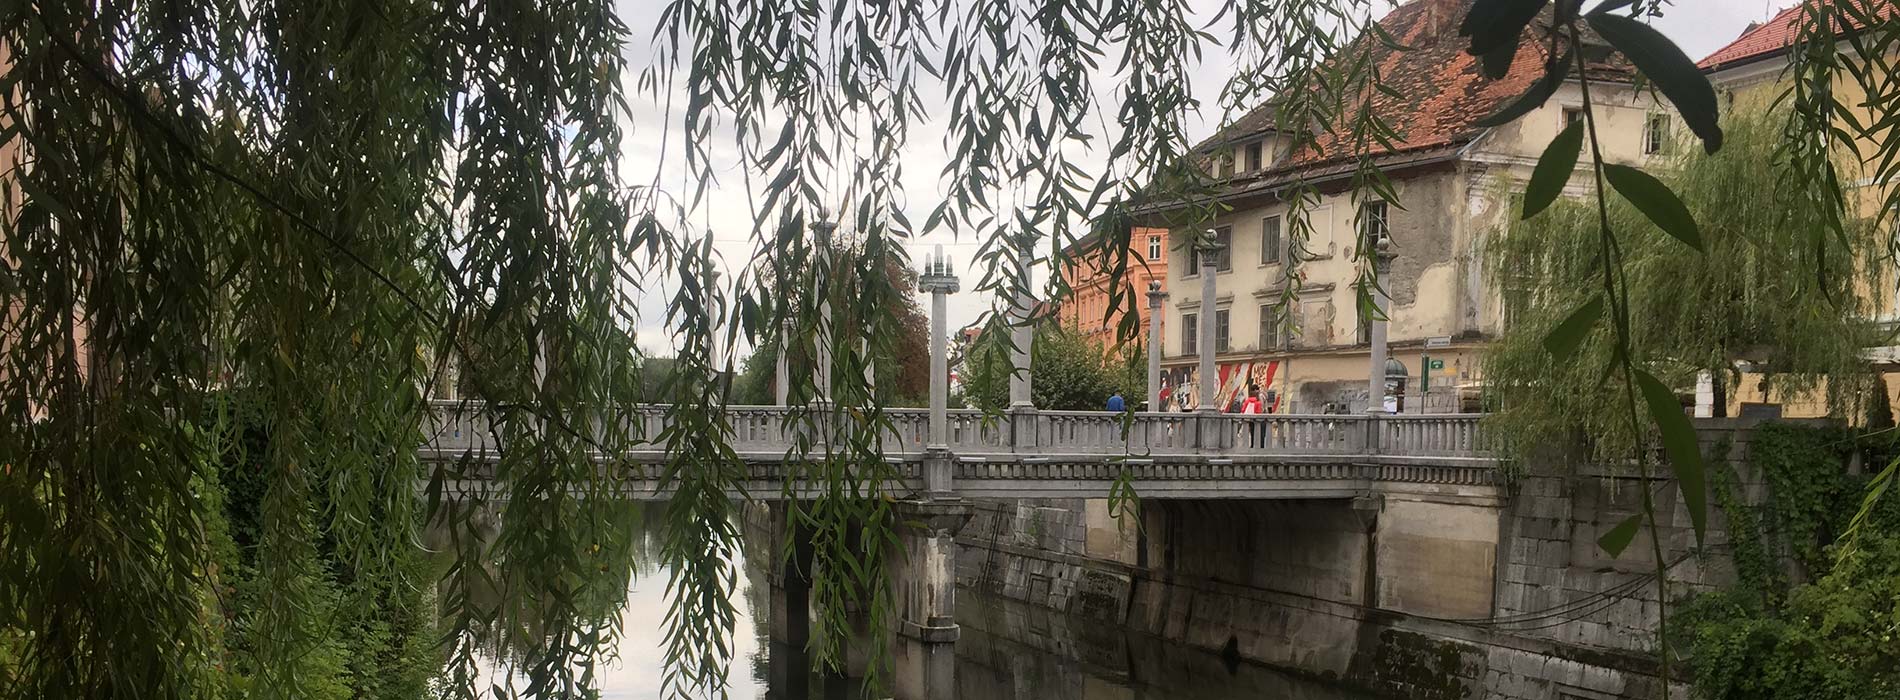 Standing under a willow tree, looking through the leaves at a bridge in Ljubljana, Slovenia.